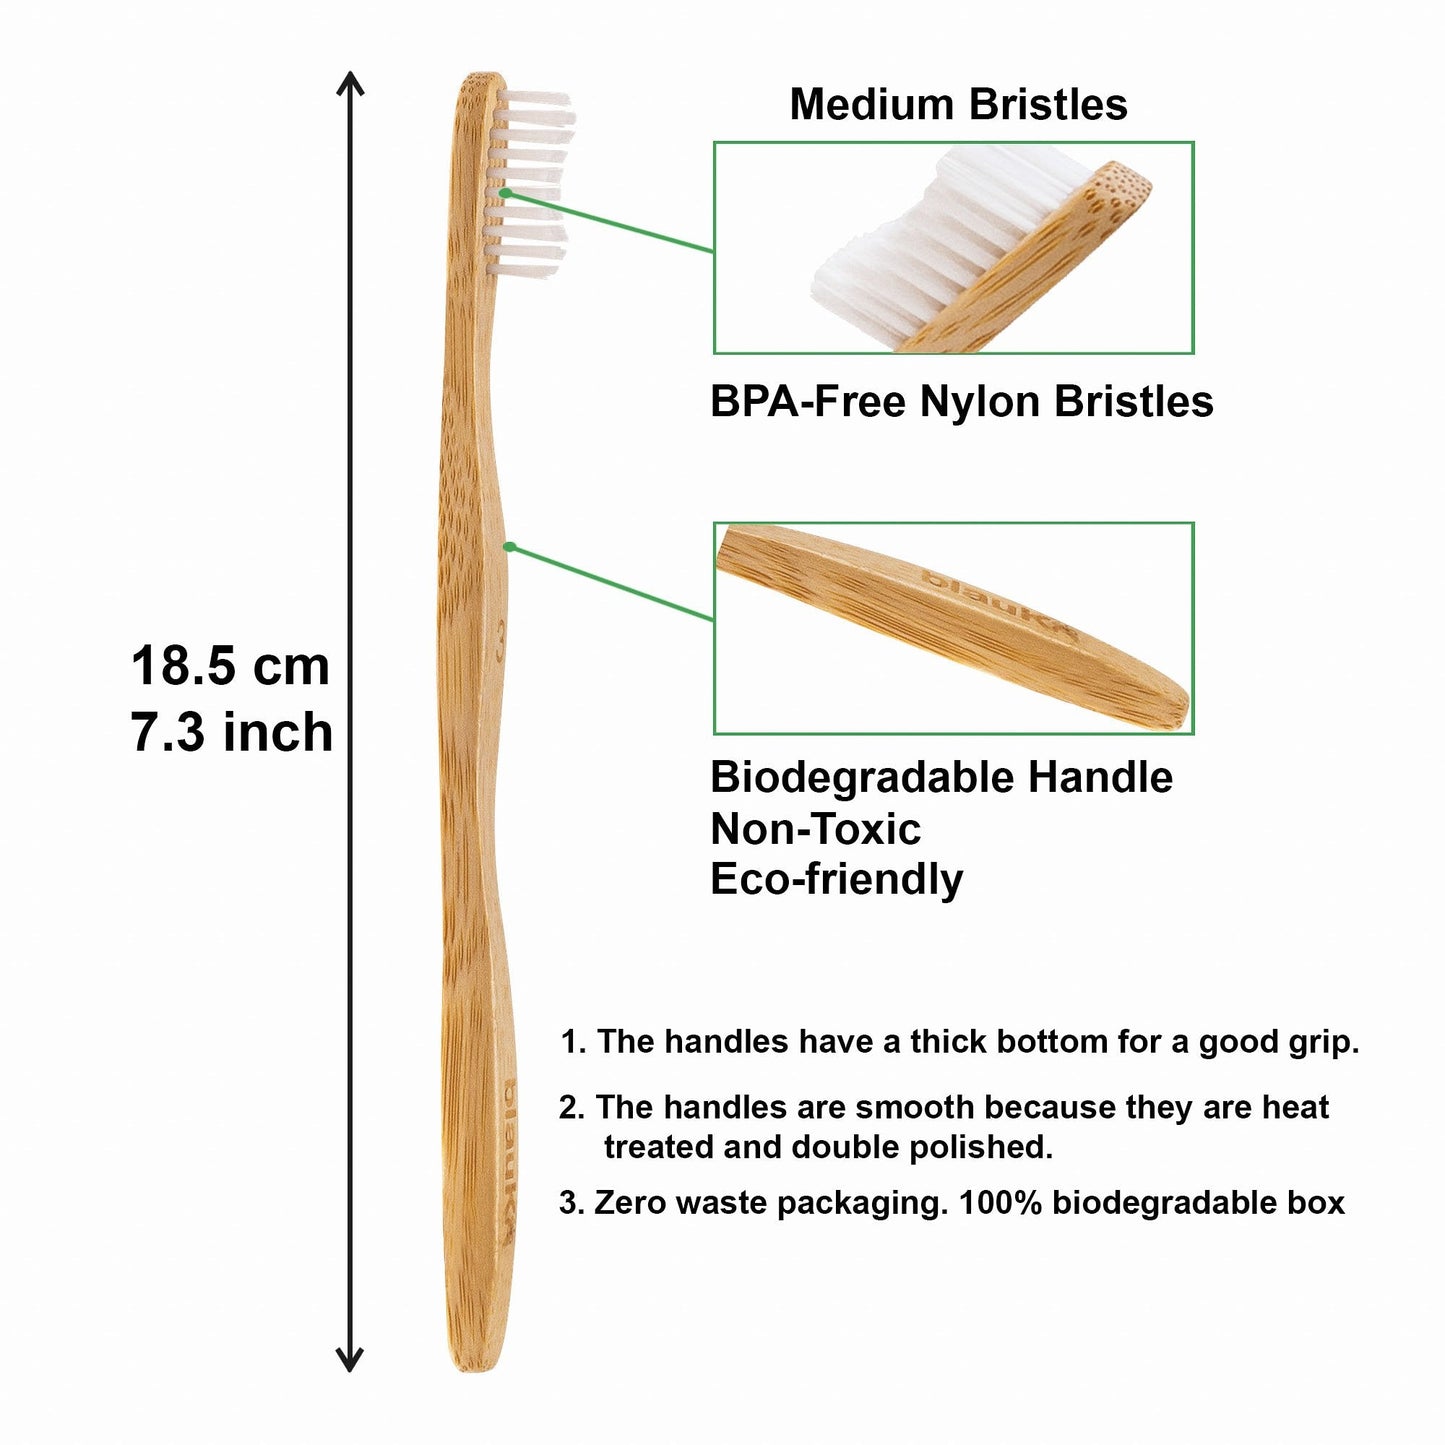 Bamboo Toothbrush Set 4-Pack - Bamboo Toothbrushes with Medium Bristles for Adults - Eco-Friendly, Biodegradable, Natural Wooden Toothbrushes-9